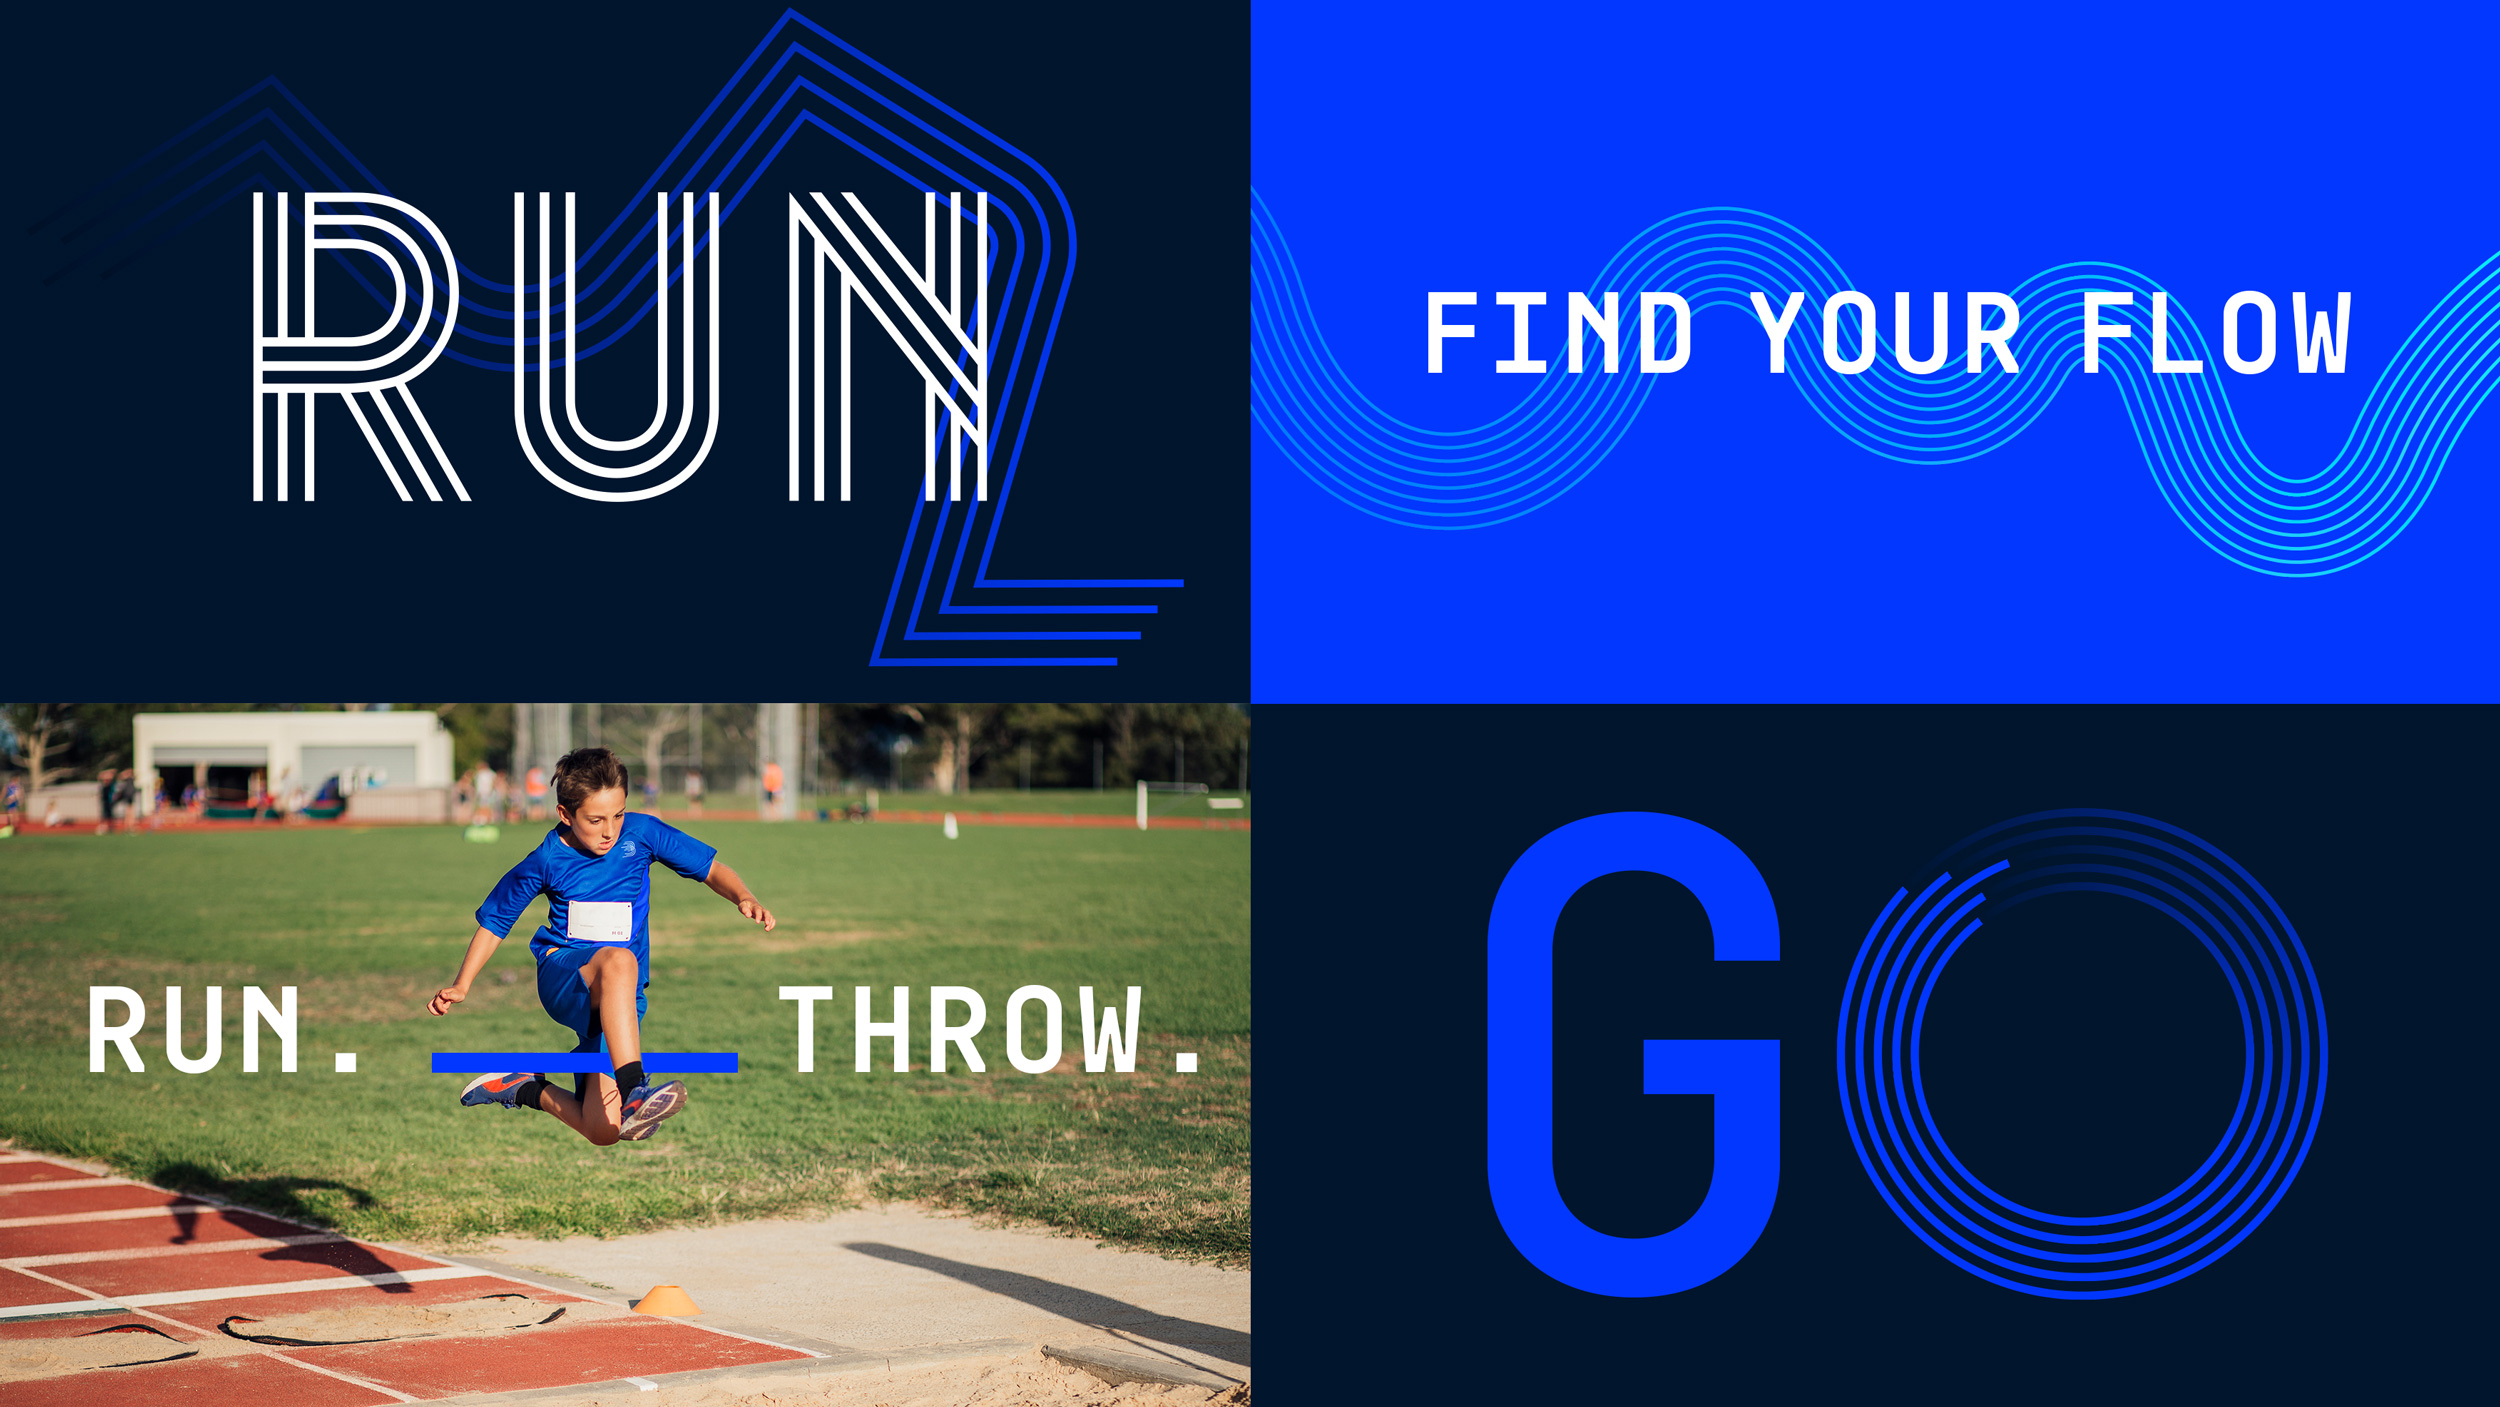 Selection of brand images for athletics club